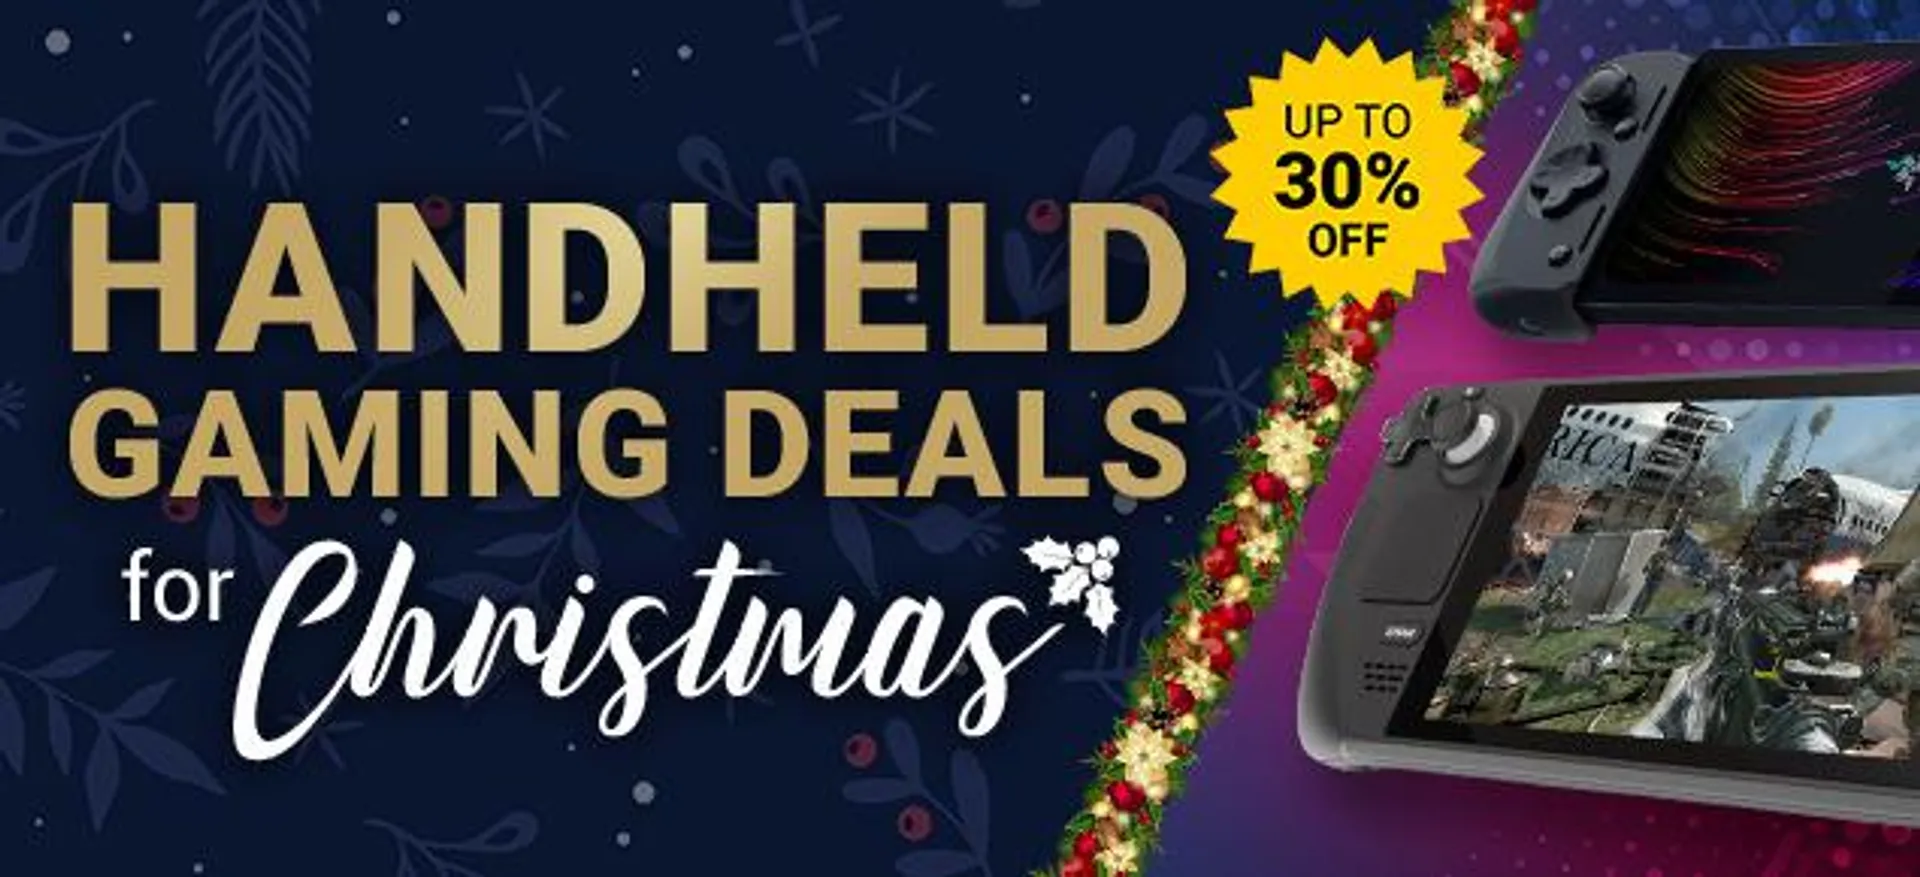 Handheld Gaming Deals for Christmas!